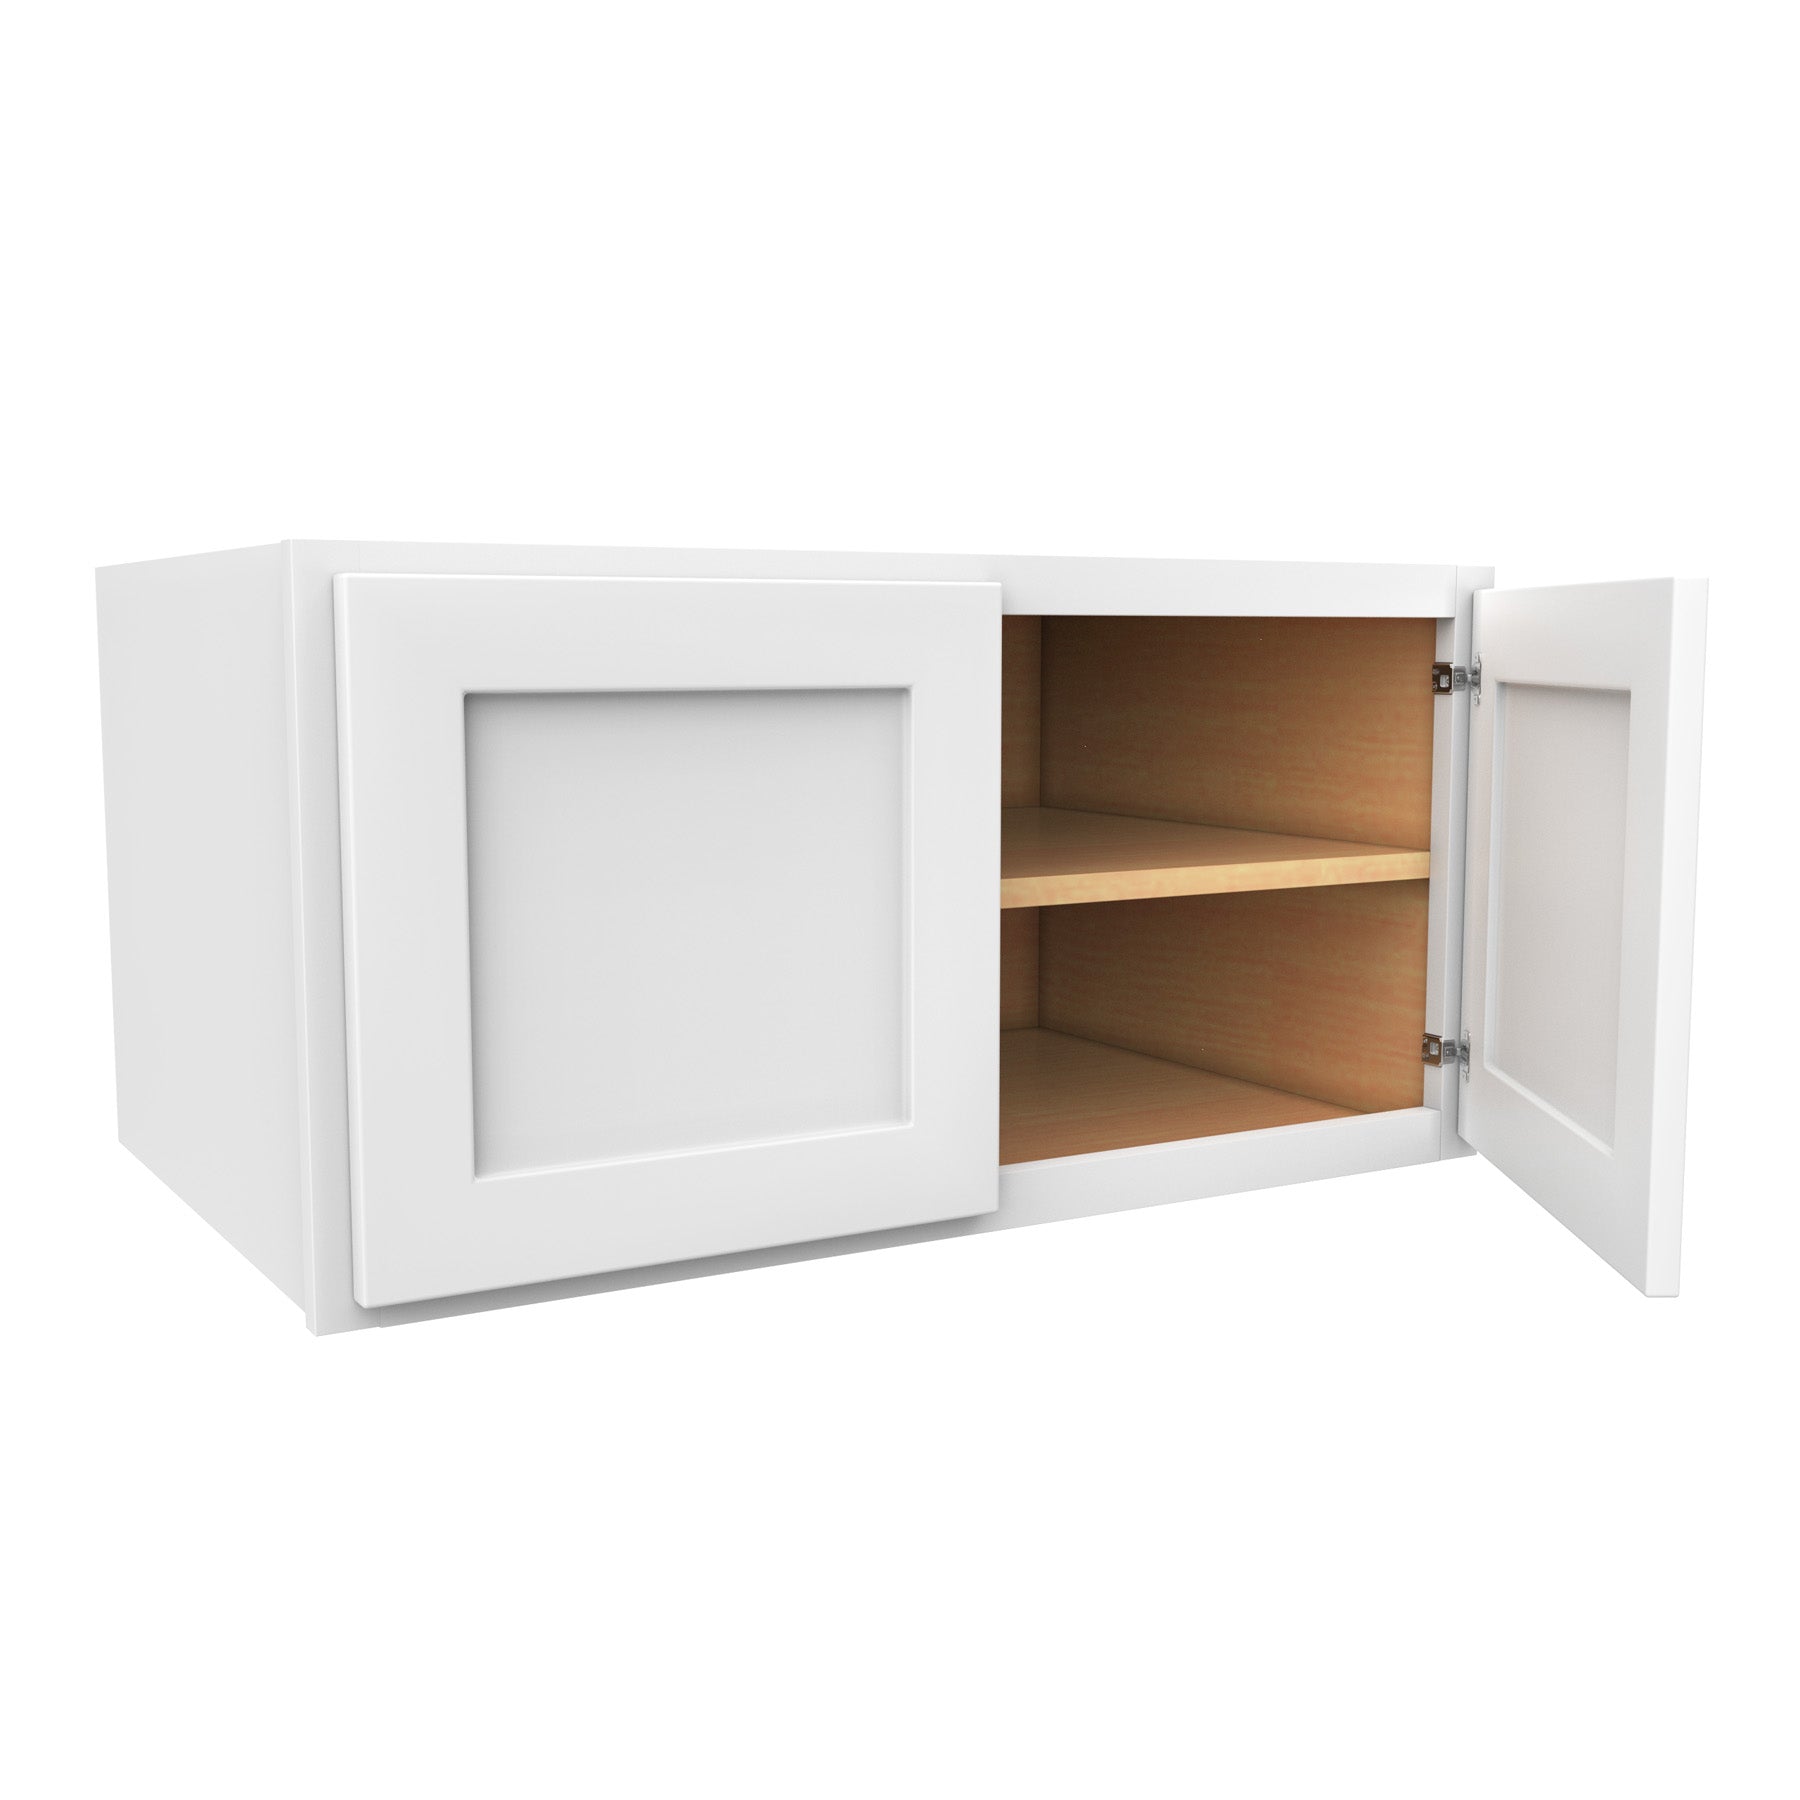 18 Inch High Above Refrigerator Deep Wall Bridge Cabinet - Luxor White Shaker - Ready To Assemble, 36"W x 18"H x 24"D